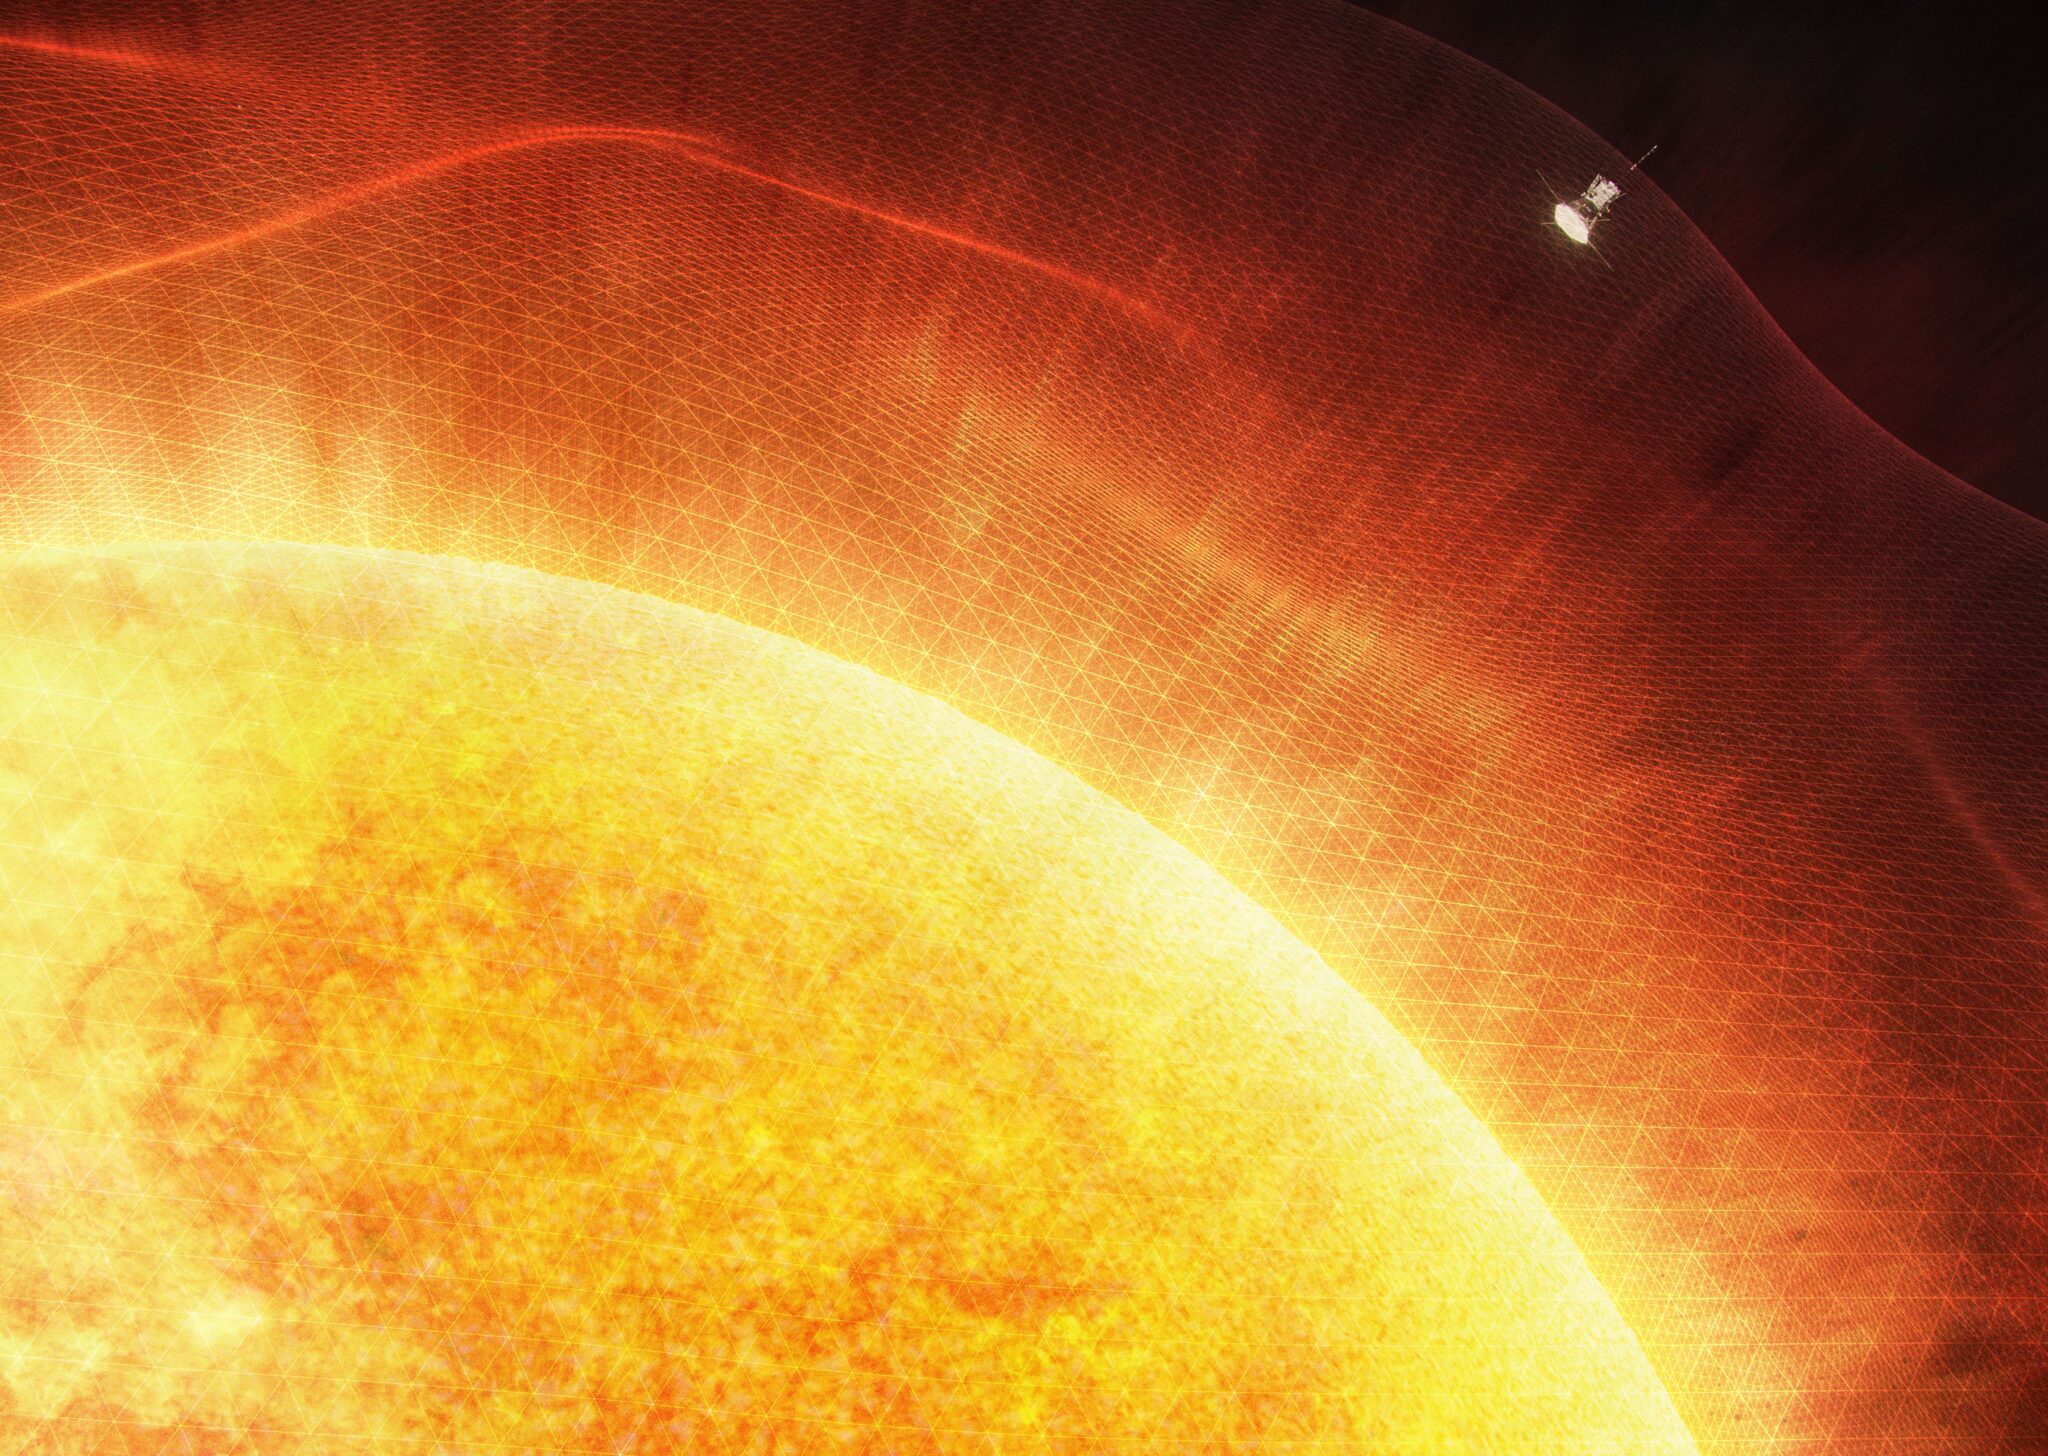 Never before has a space probe been this close to the sun